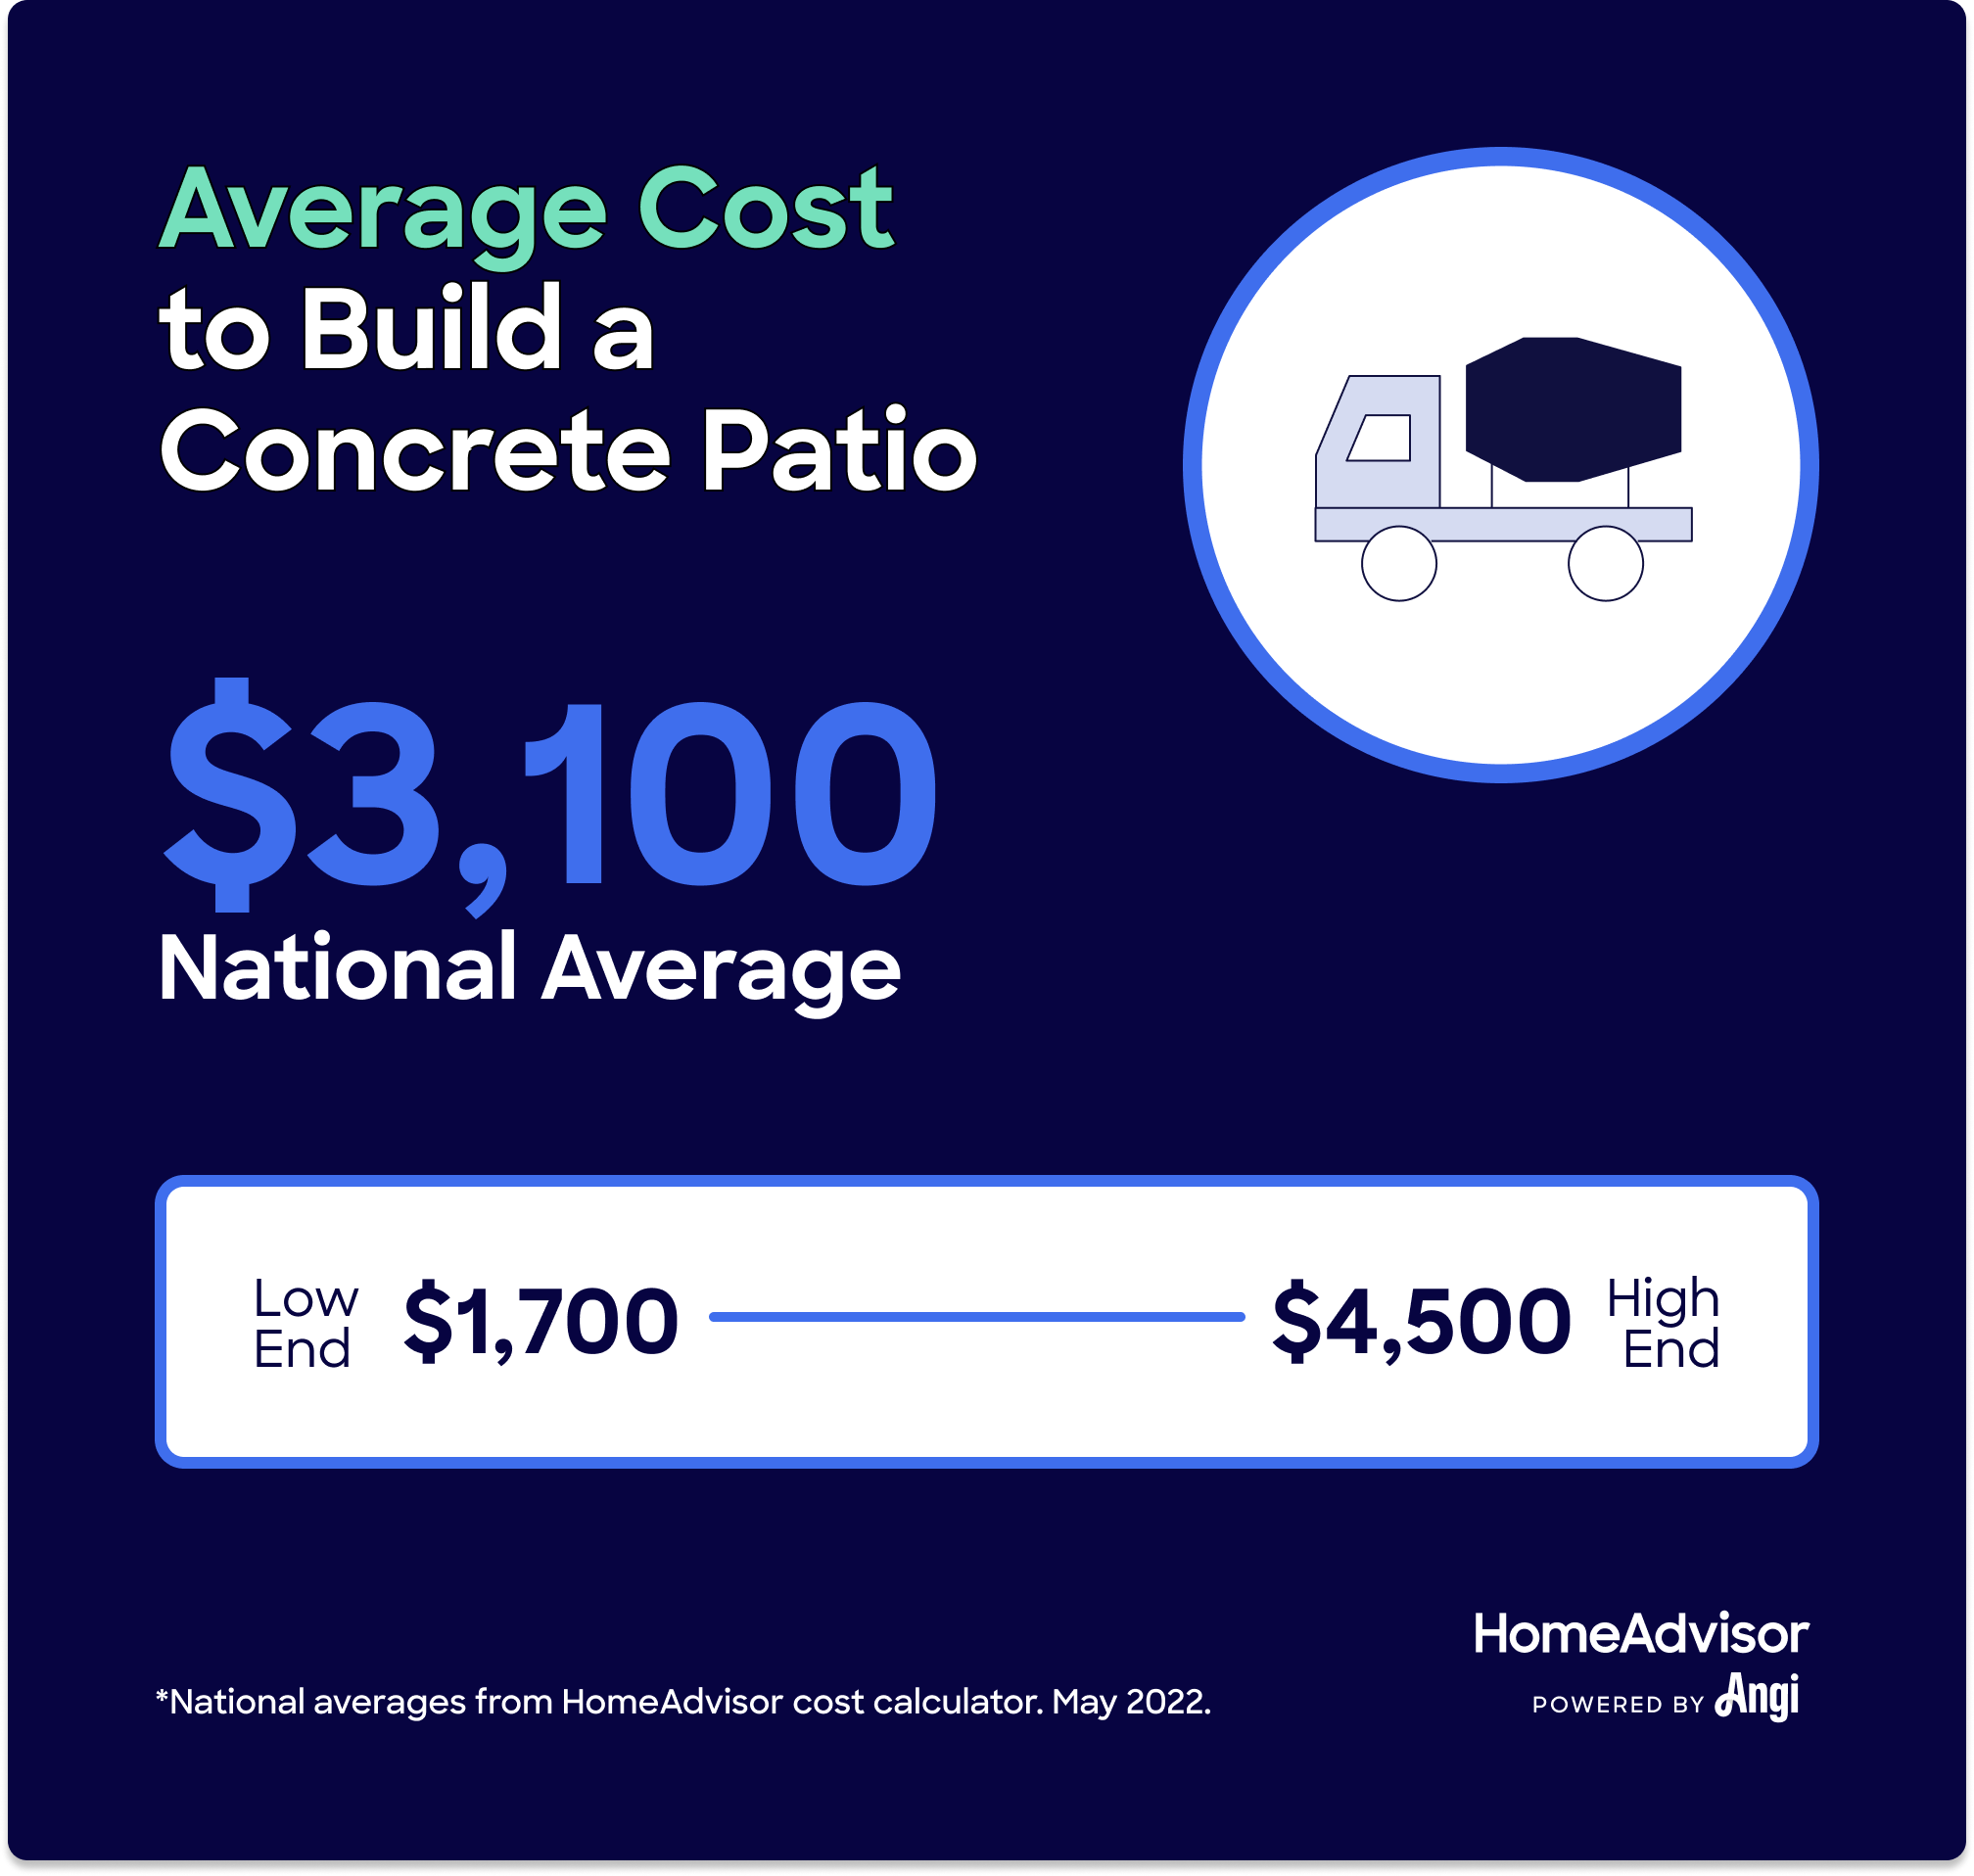 How Much Does It Cost to Build a Concrete Patio?